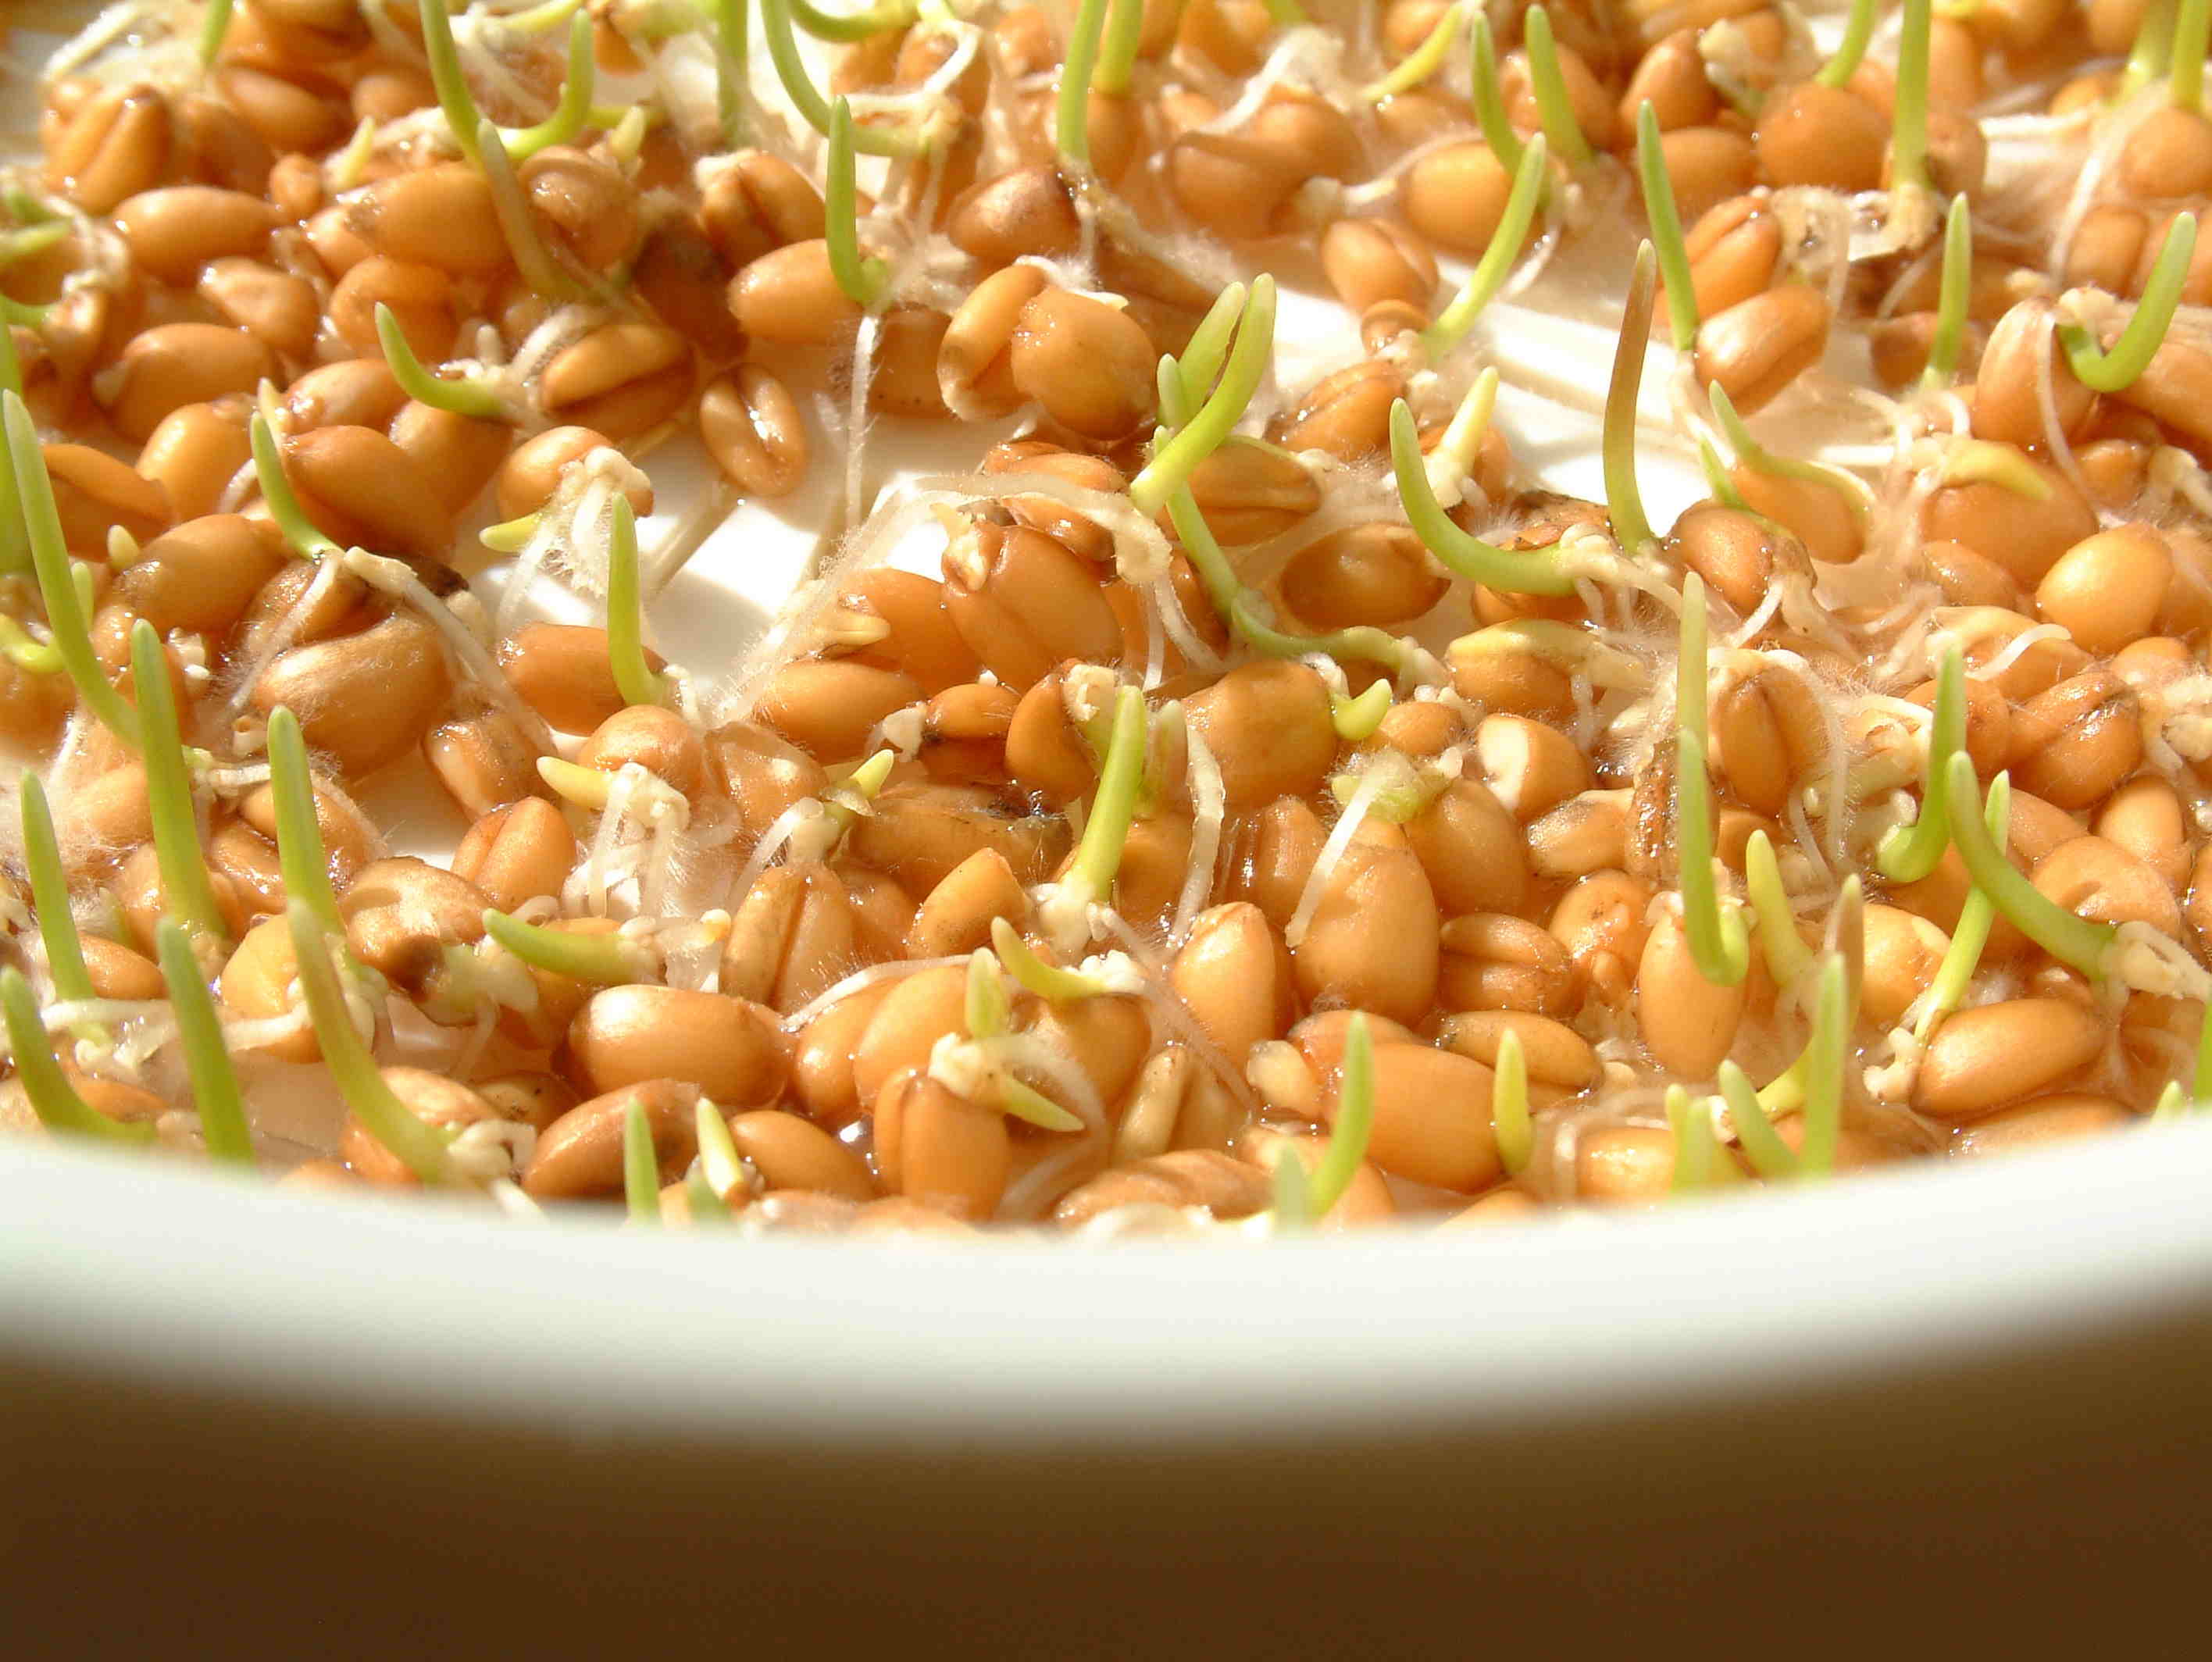 sprouts1.jpg